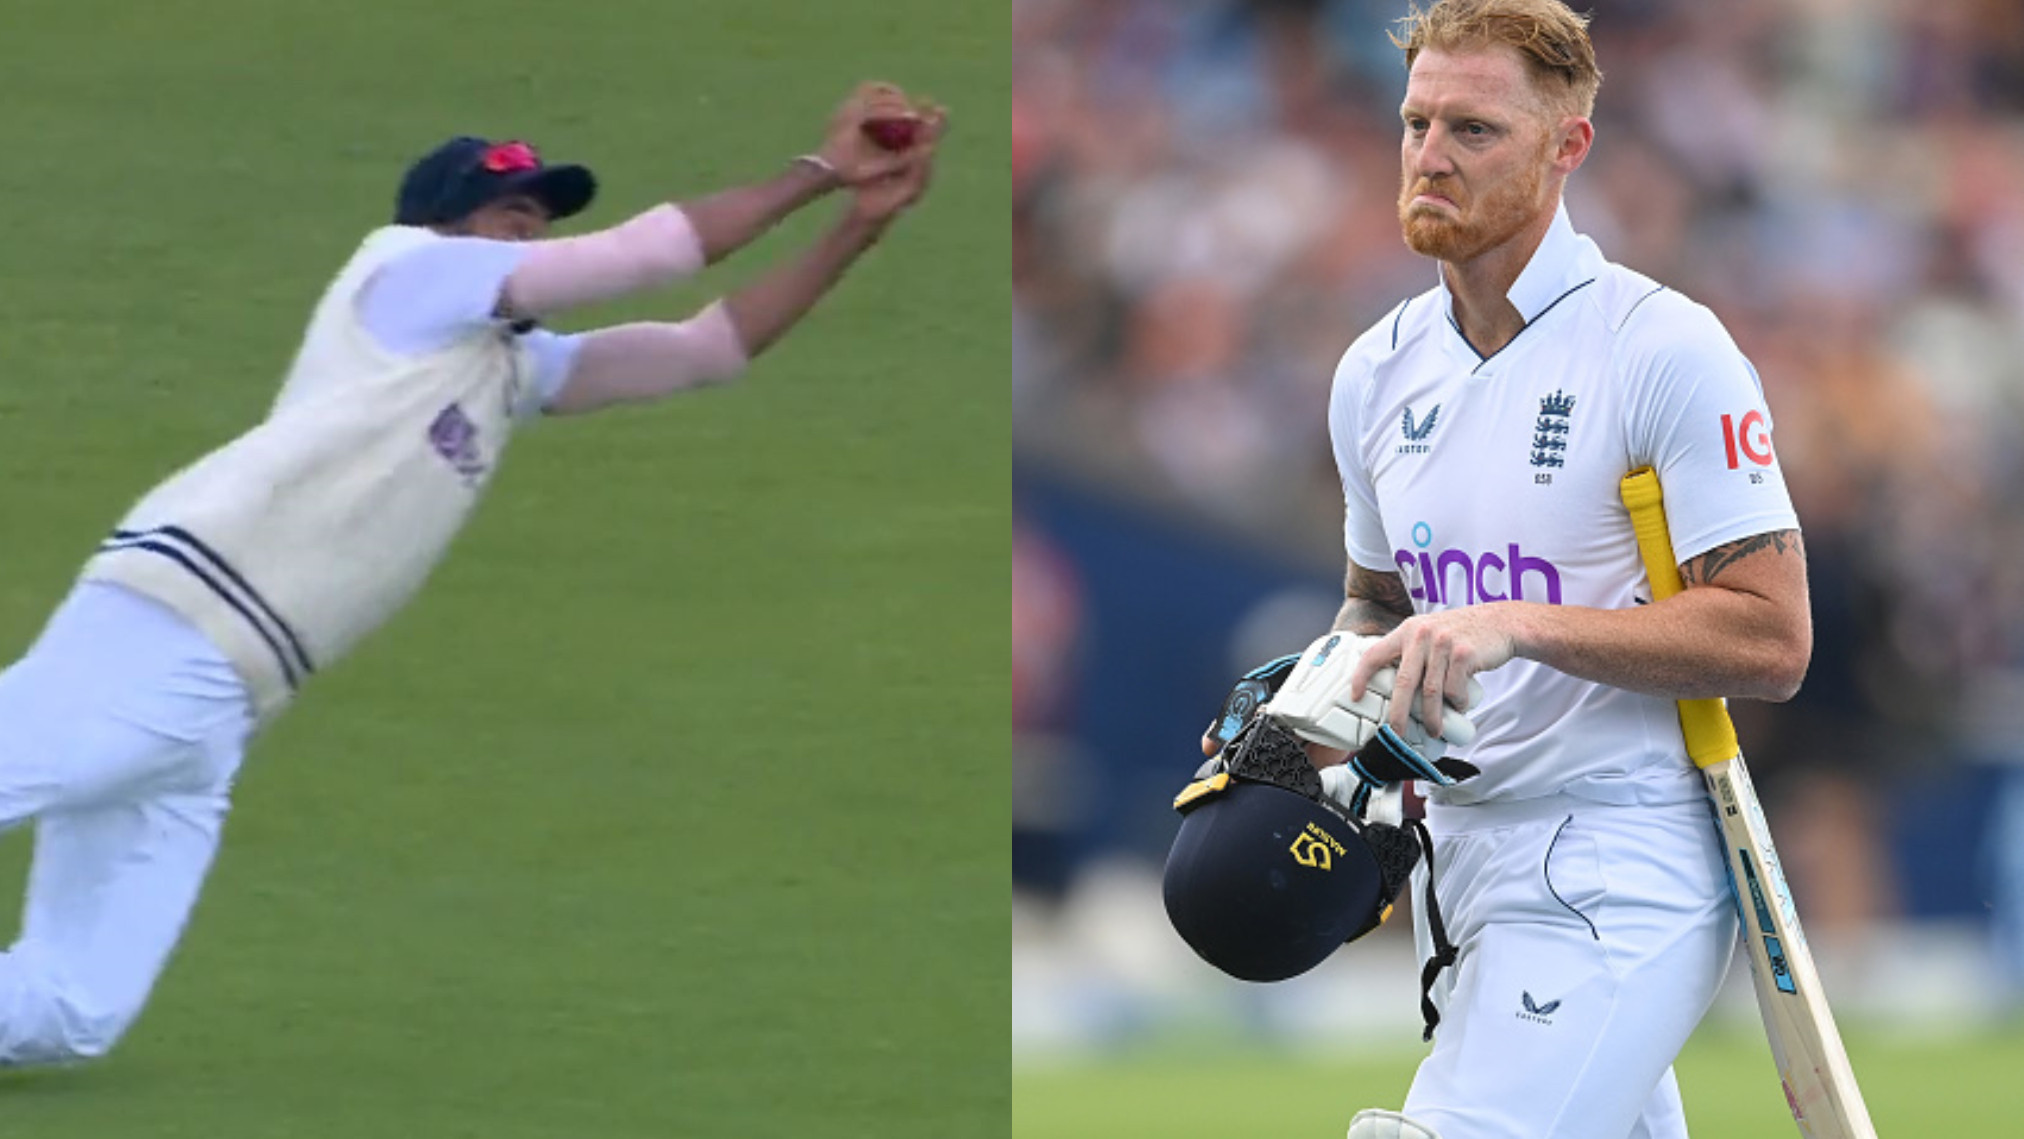 ENG v IND 2022: WATCH- Jasprit Bumrah takes a blinder to dismiss Ben Stokes after dropping him a ball before